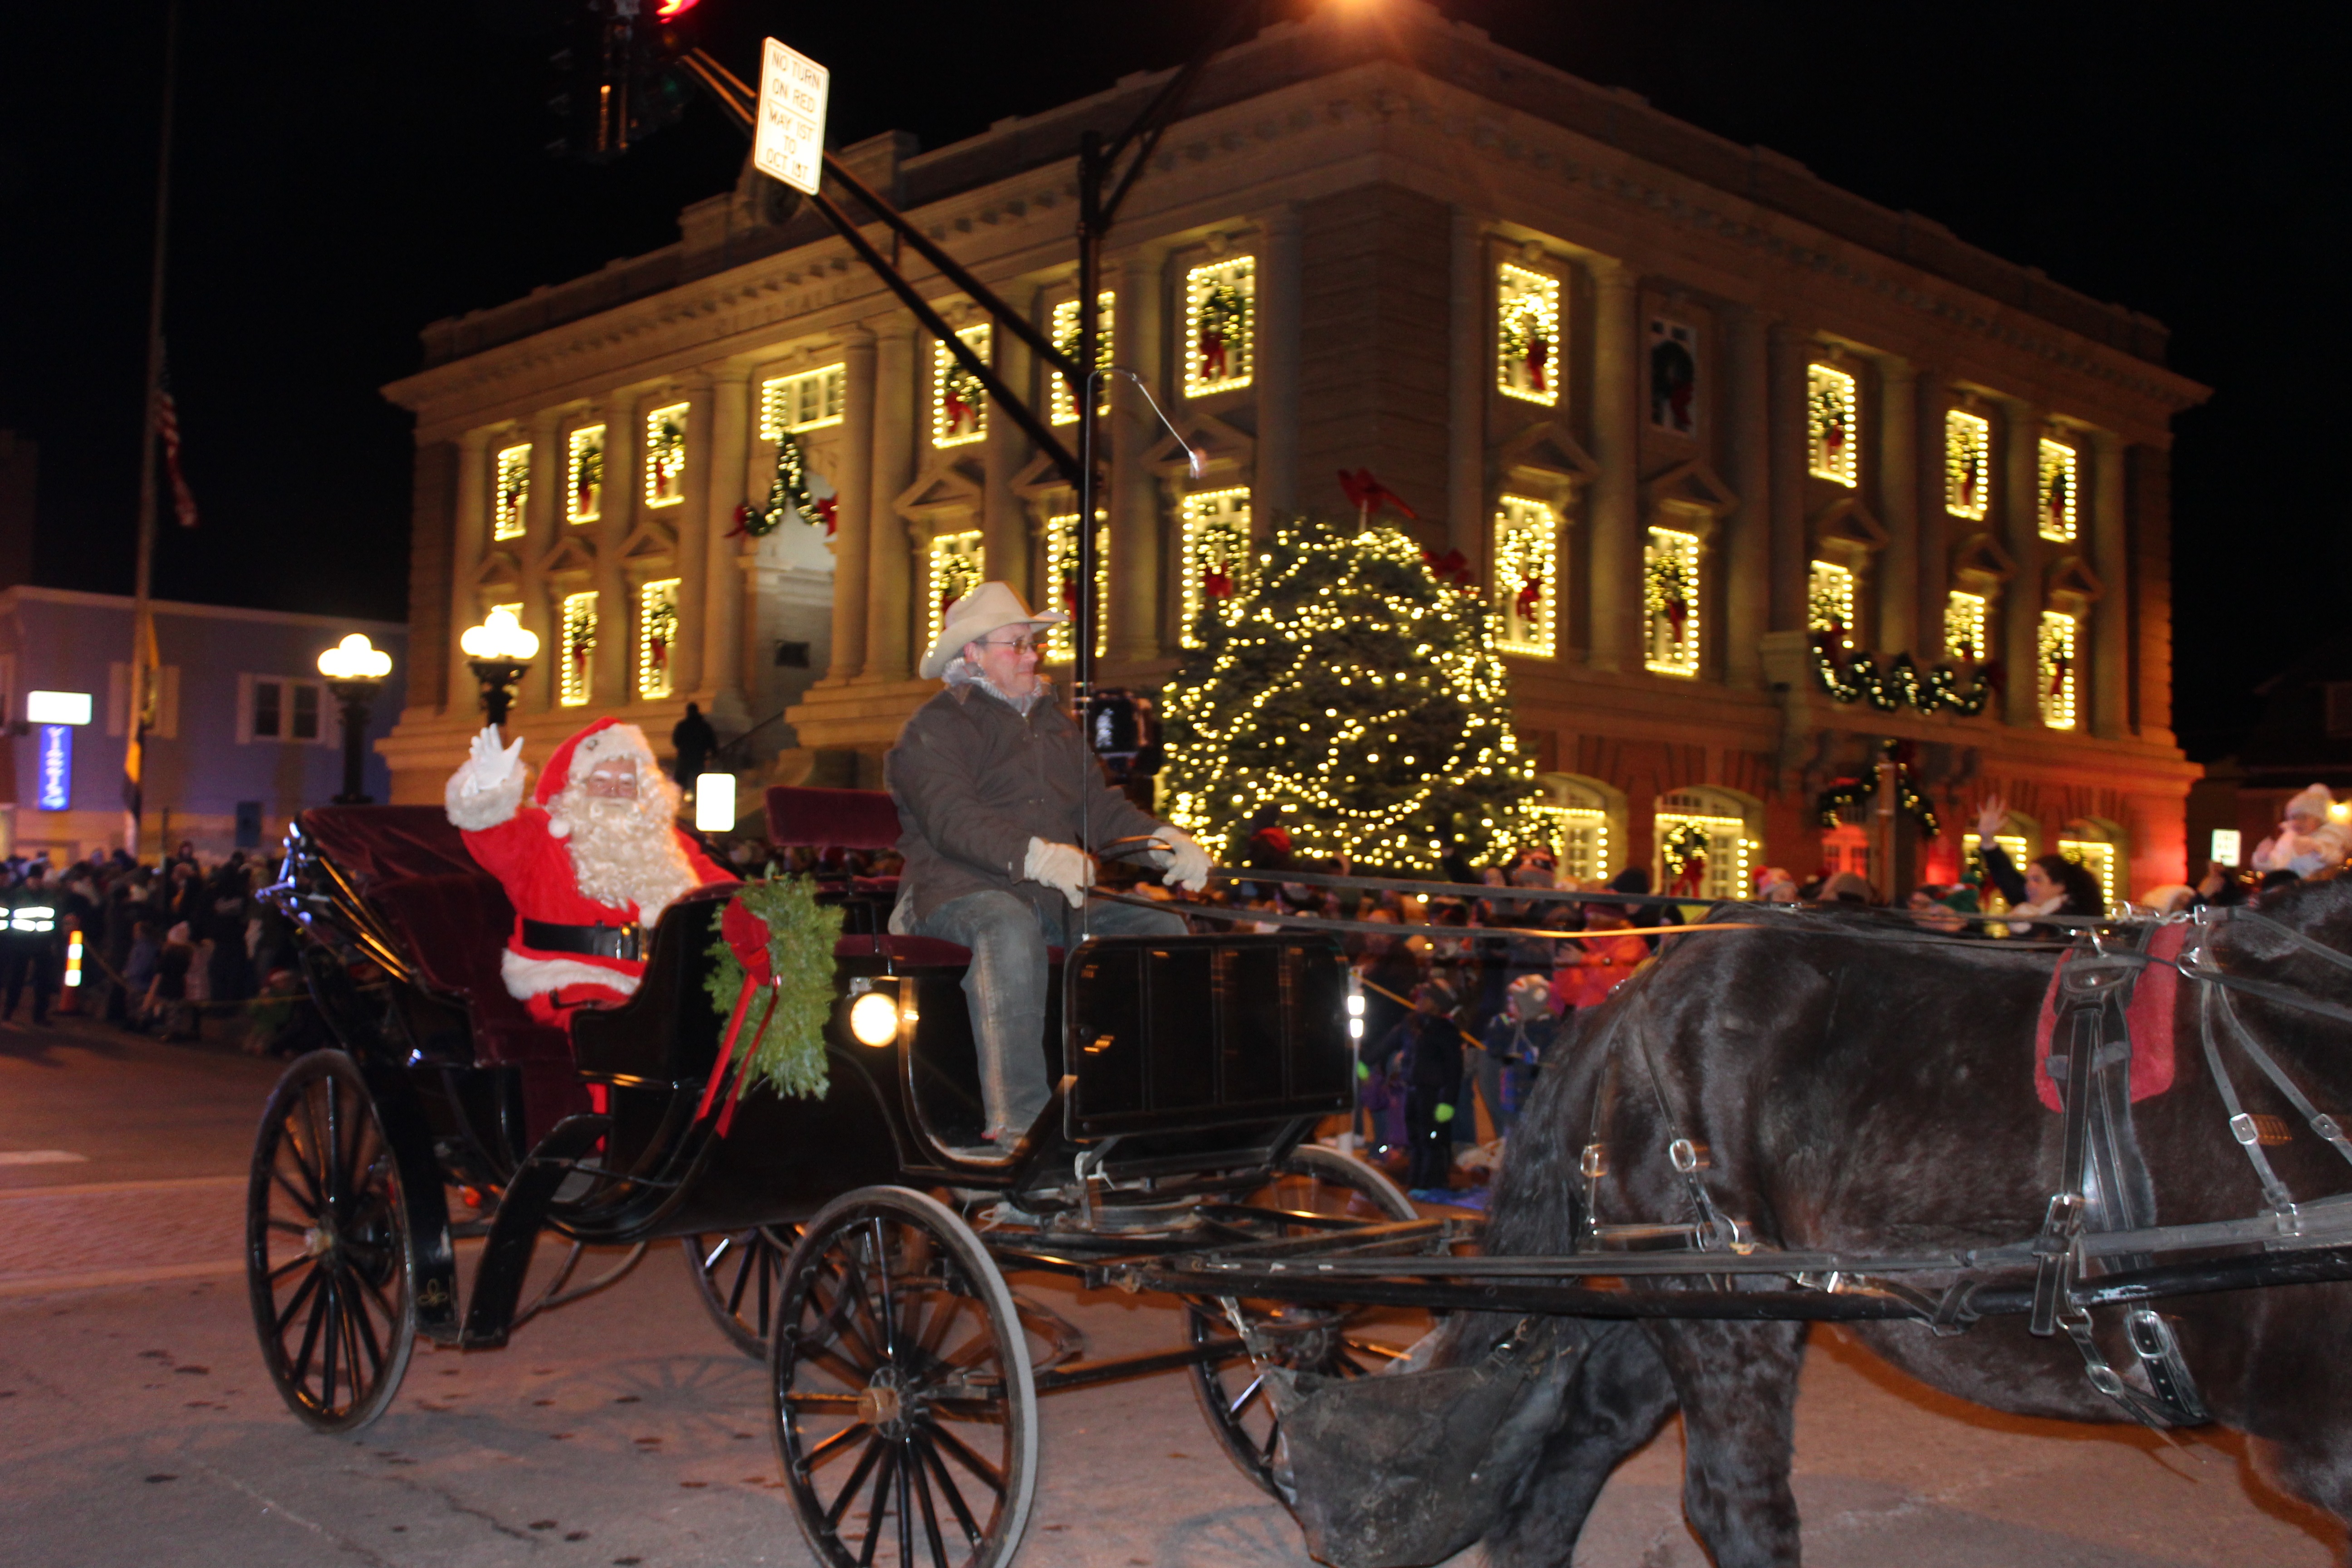 Ocean City Christmas Parade Delights Thousands of